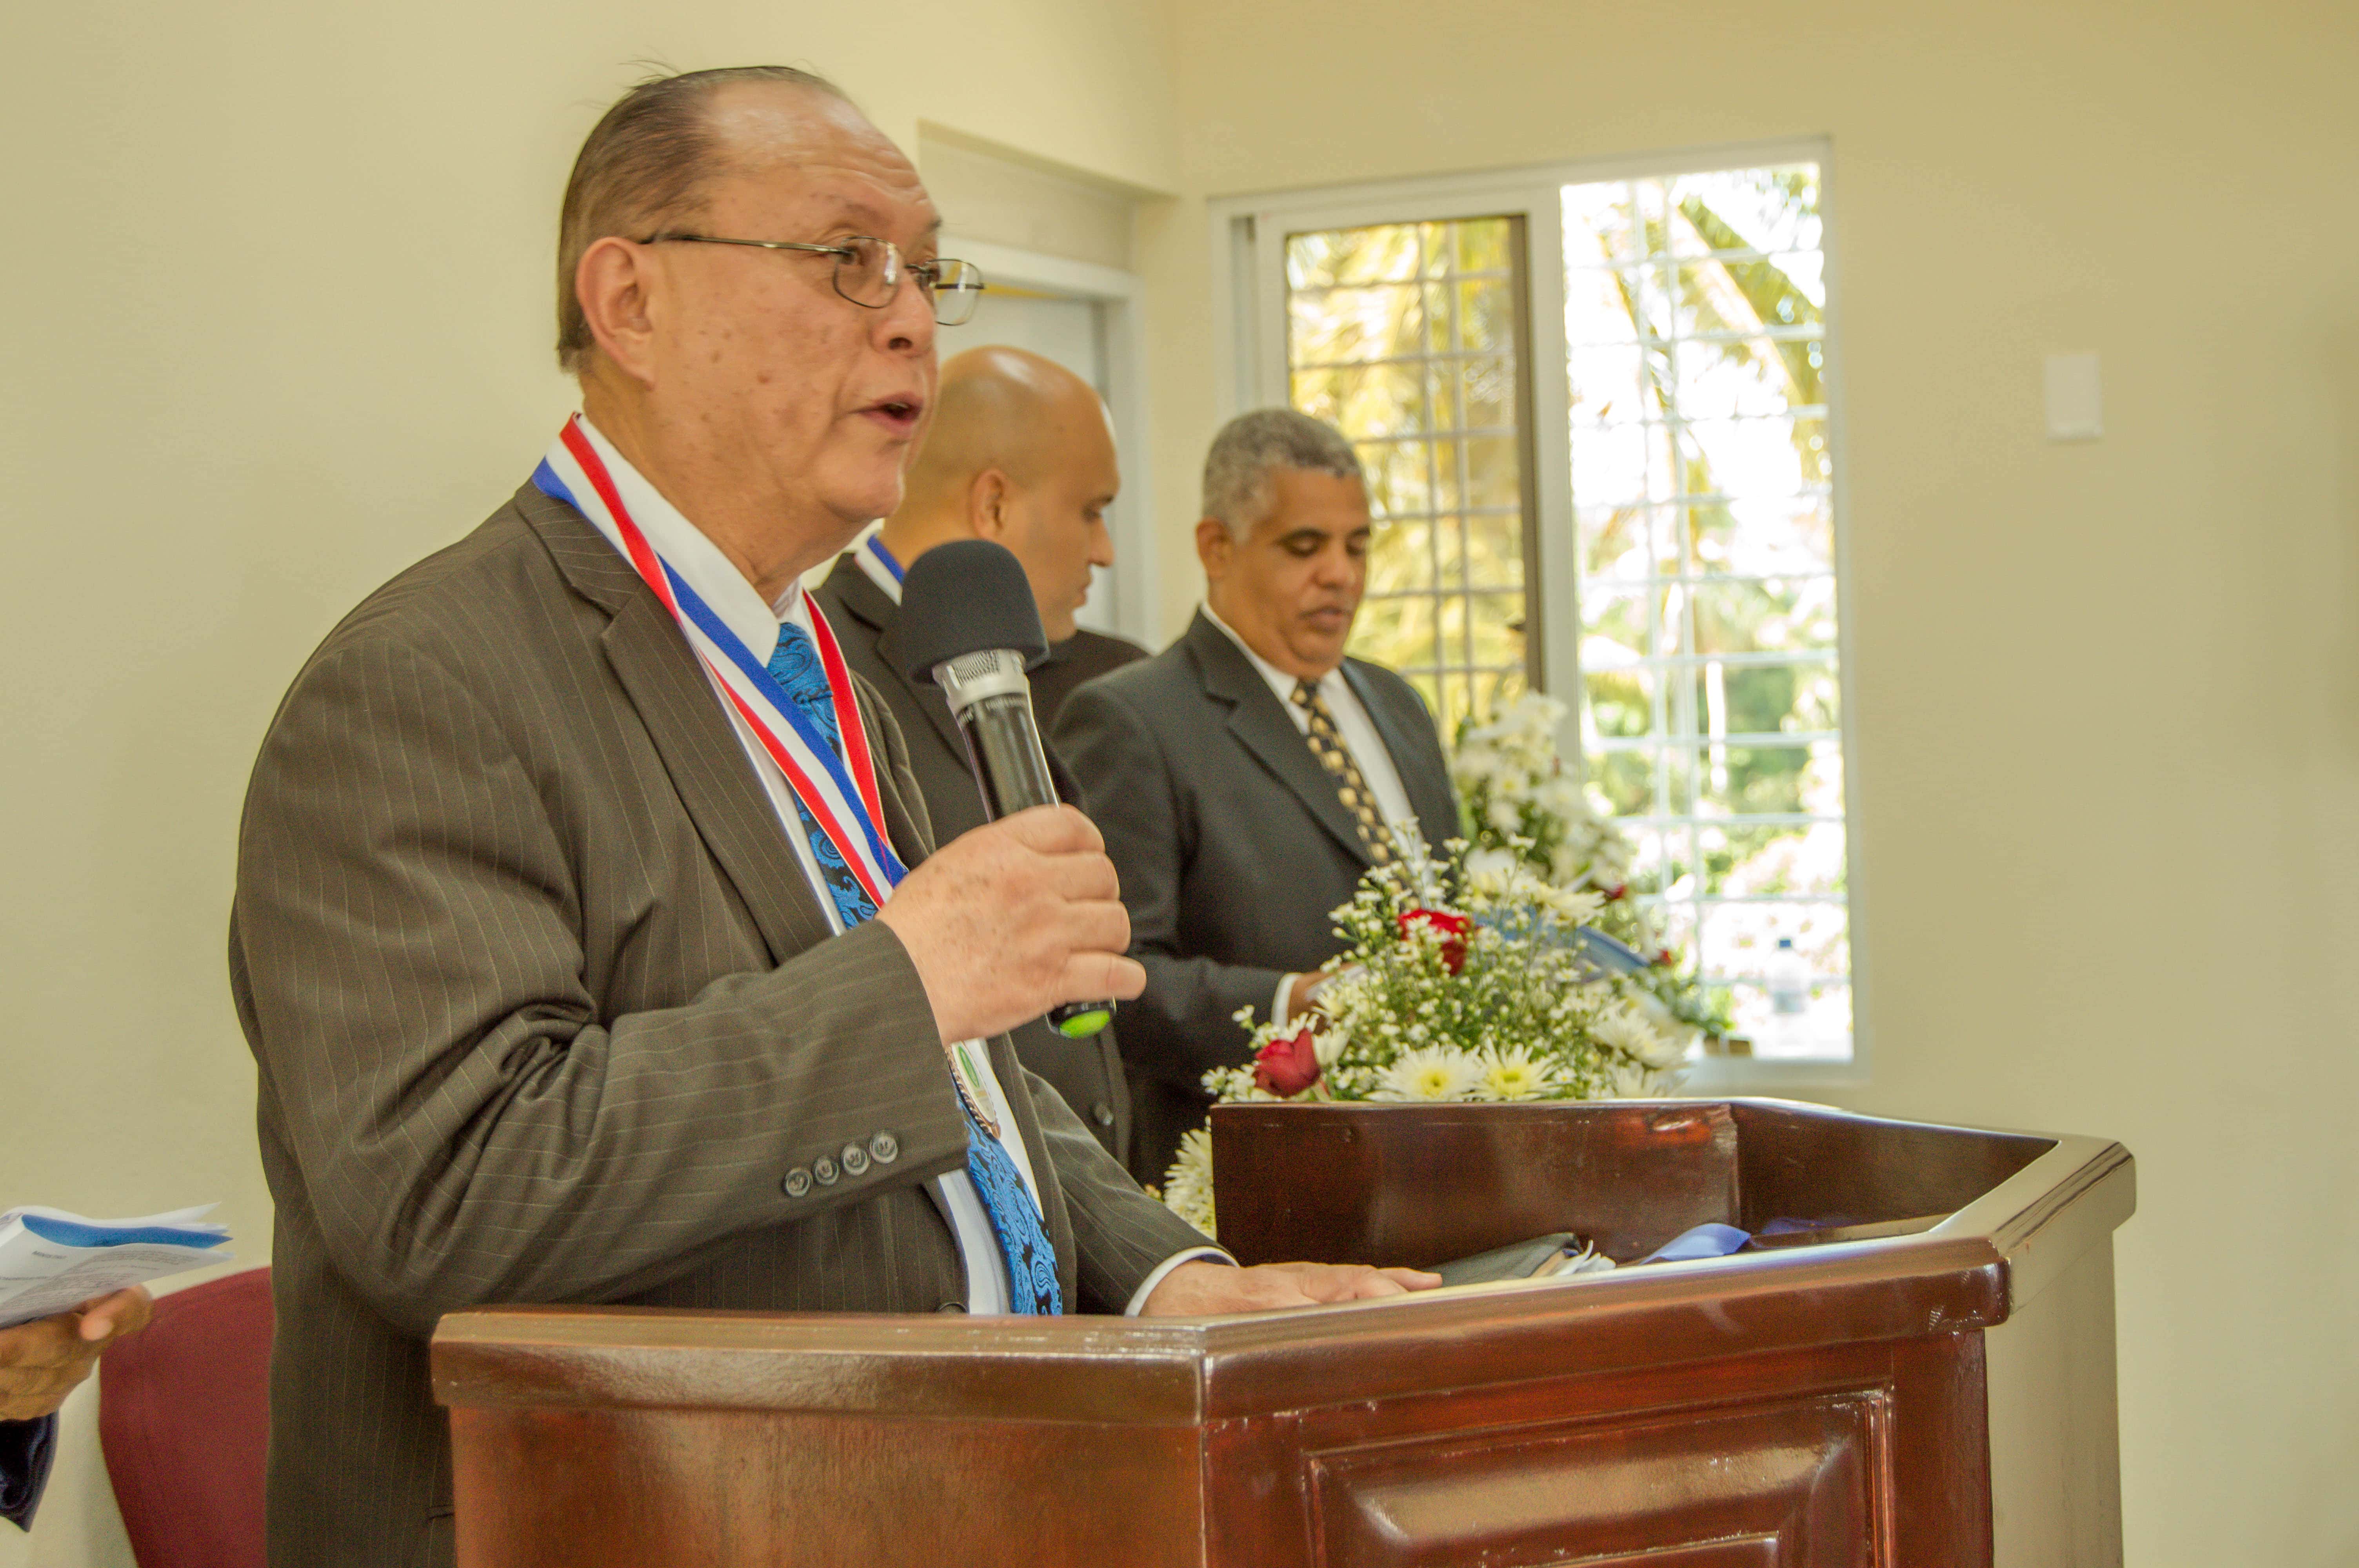 Adventist World Radio President Dowell Chow congratulated the church for evangelism advances with the new church.